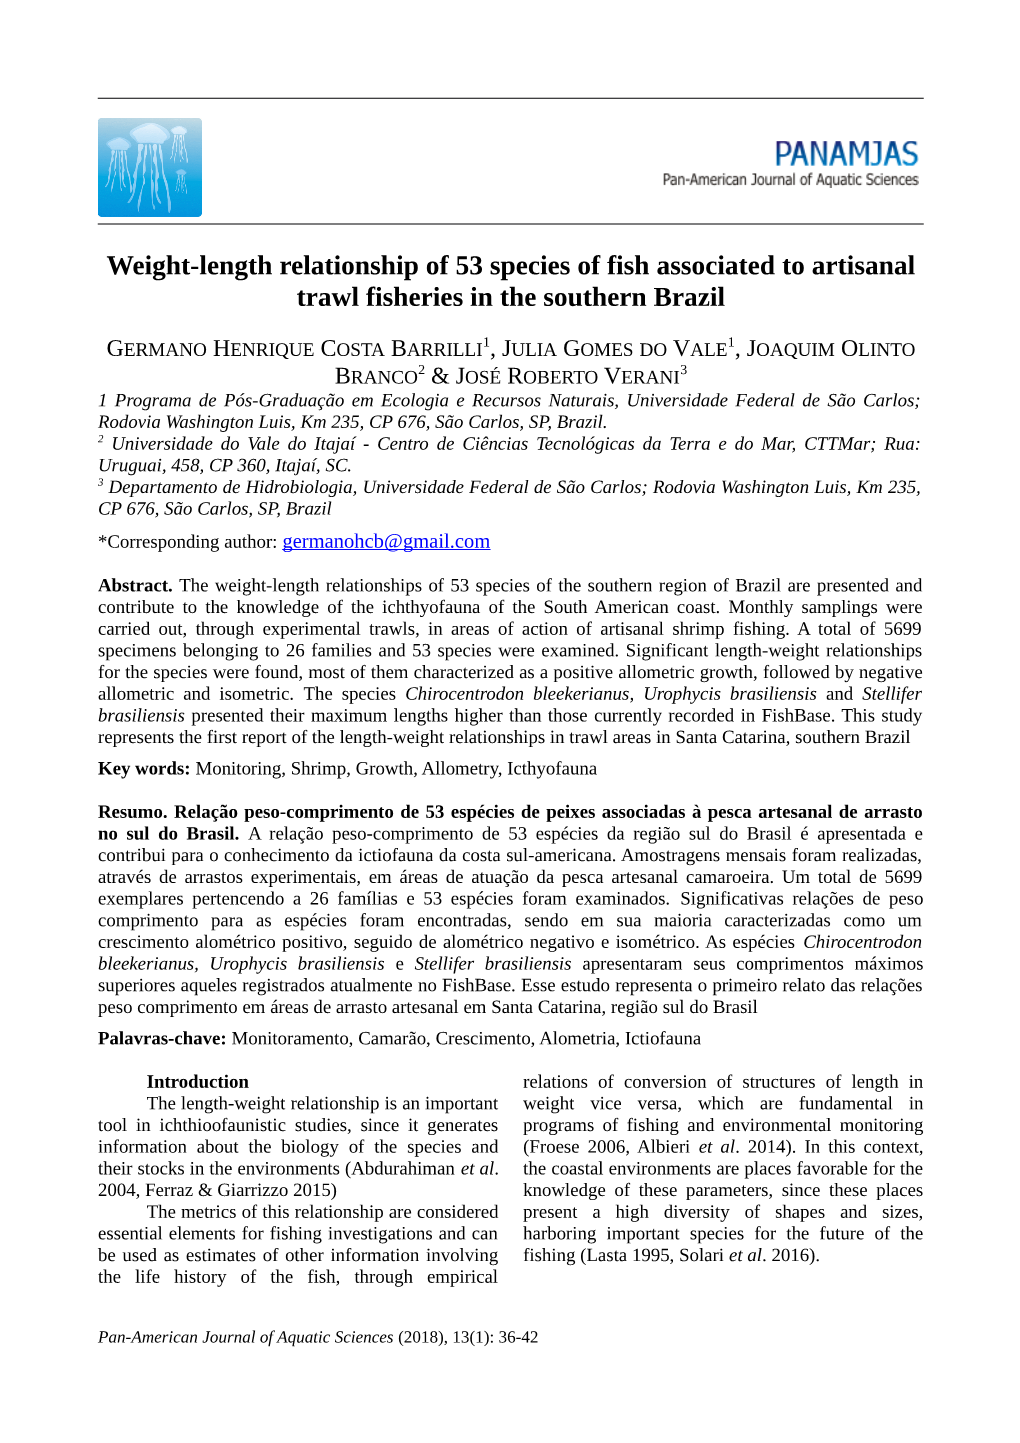 Weight-Length Relationship of 53 Species of Fish Associated to Artisanal Trawl Fisheries in the Southern Brazil